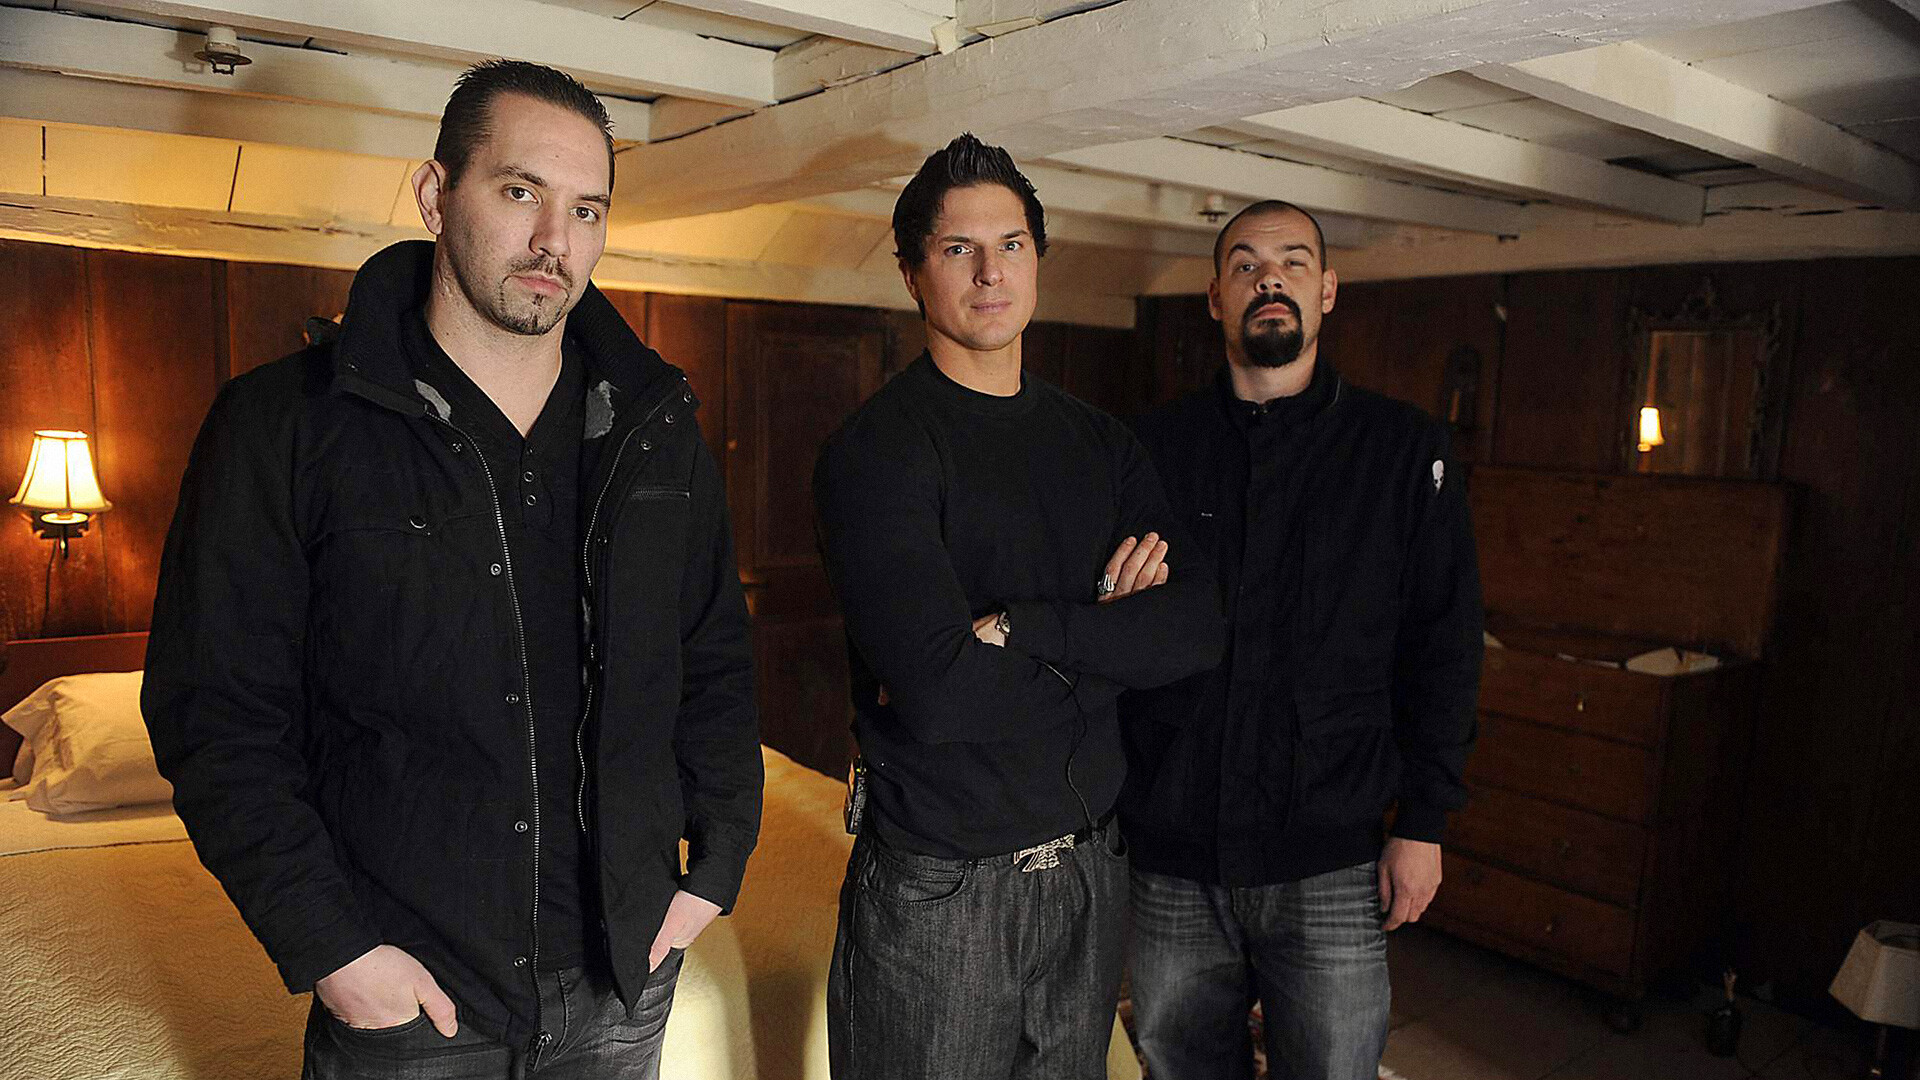 Ghost Adventures (TV Series): Nick Groff, Zak Bagans, and Aaron Goodwin are pictured at the Wayside Inn room 9, Valentine's Day Special. 1920x1080 Full HD Background.